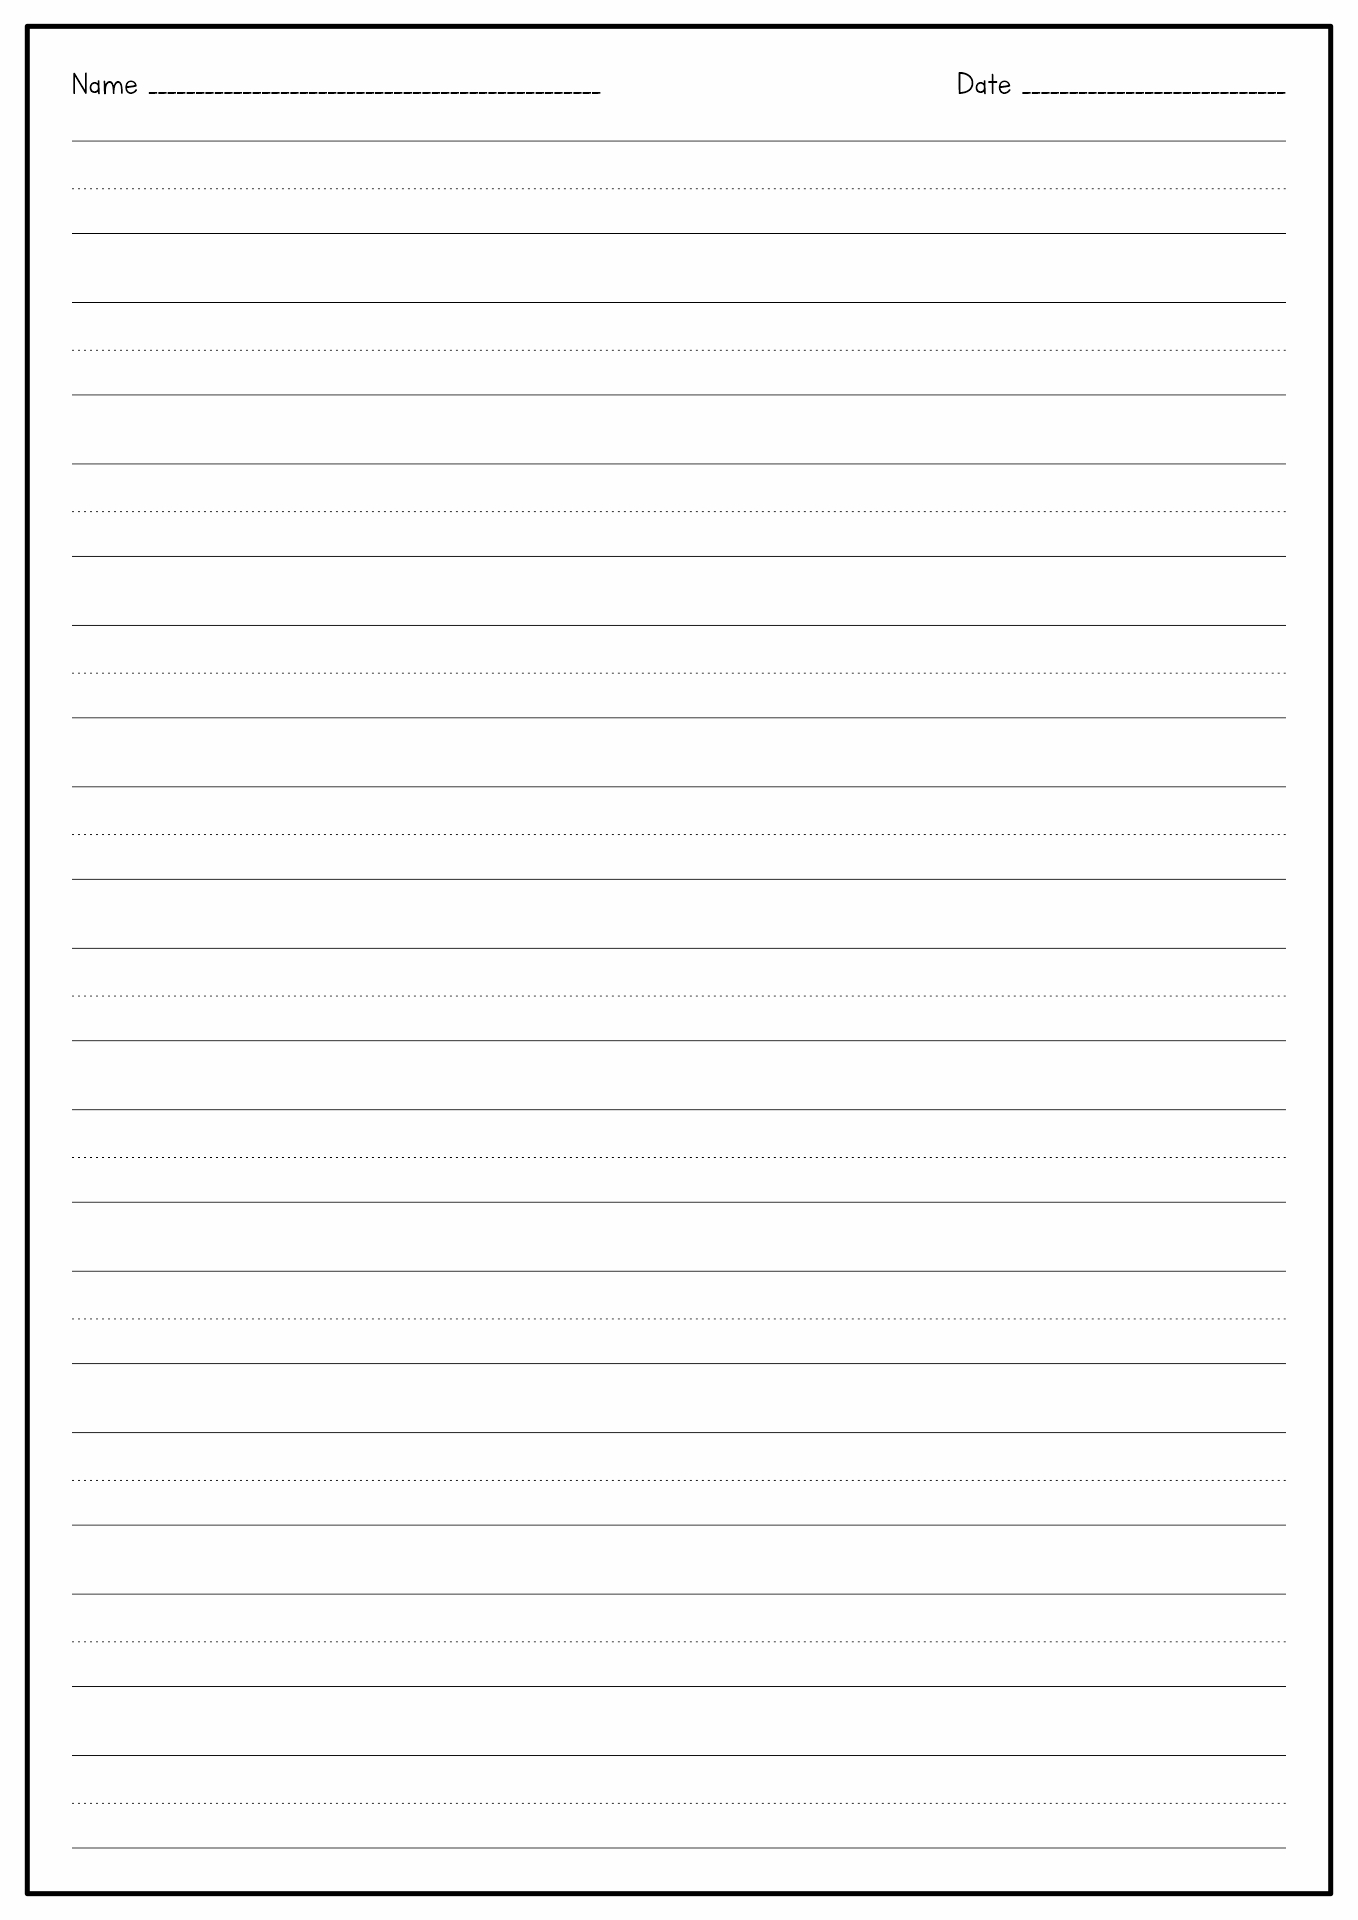 2nd Grade Writing Paper Template Image